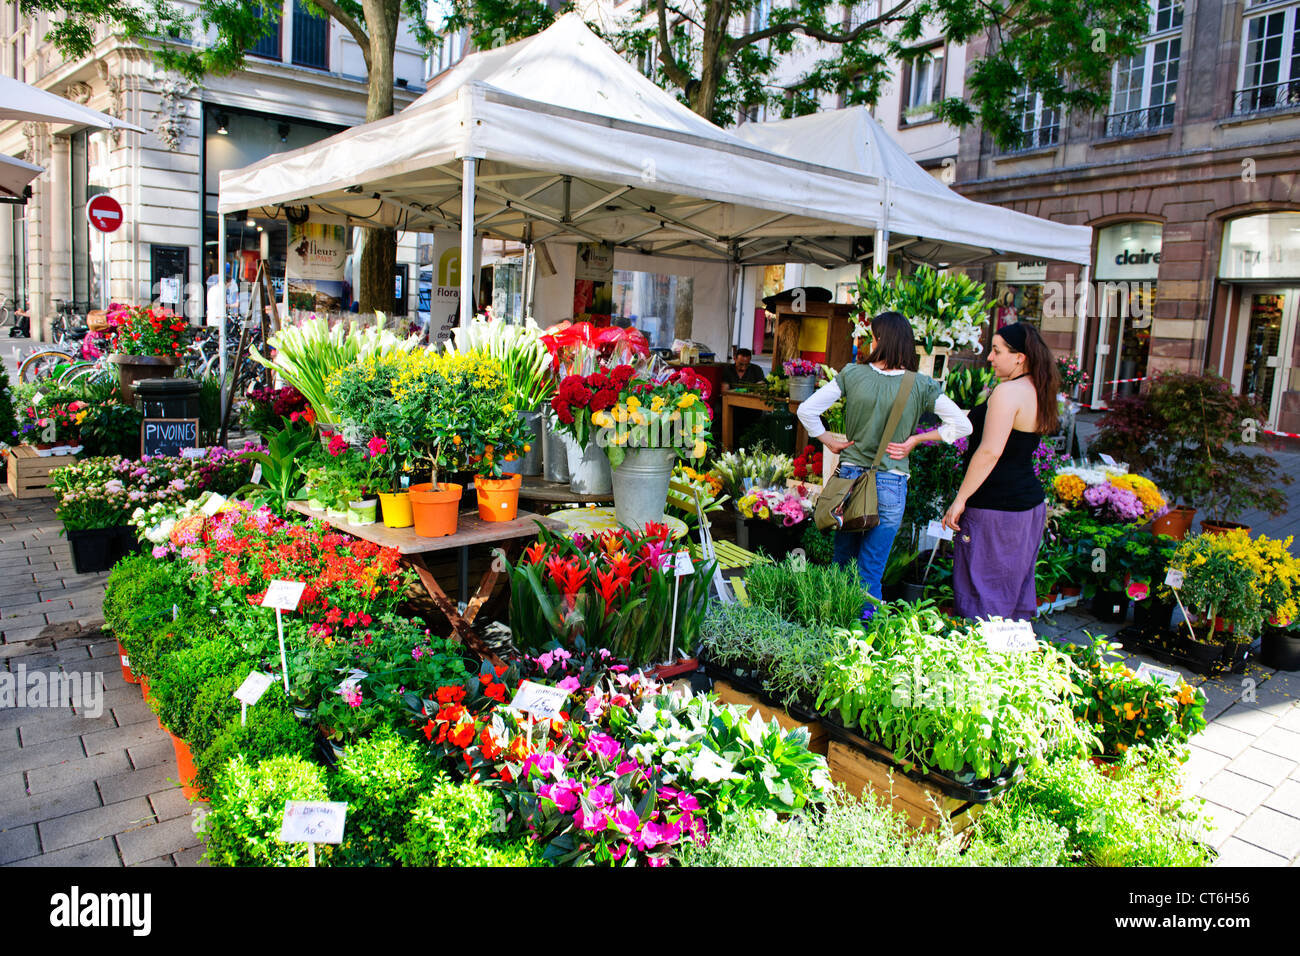 Flower Stall off Place du Marche Neuf,Strasbourg,France Stock Photo